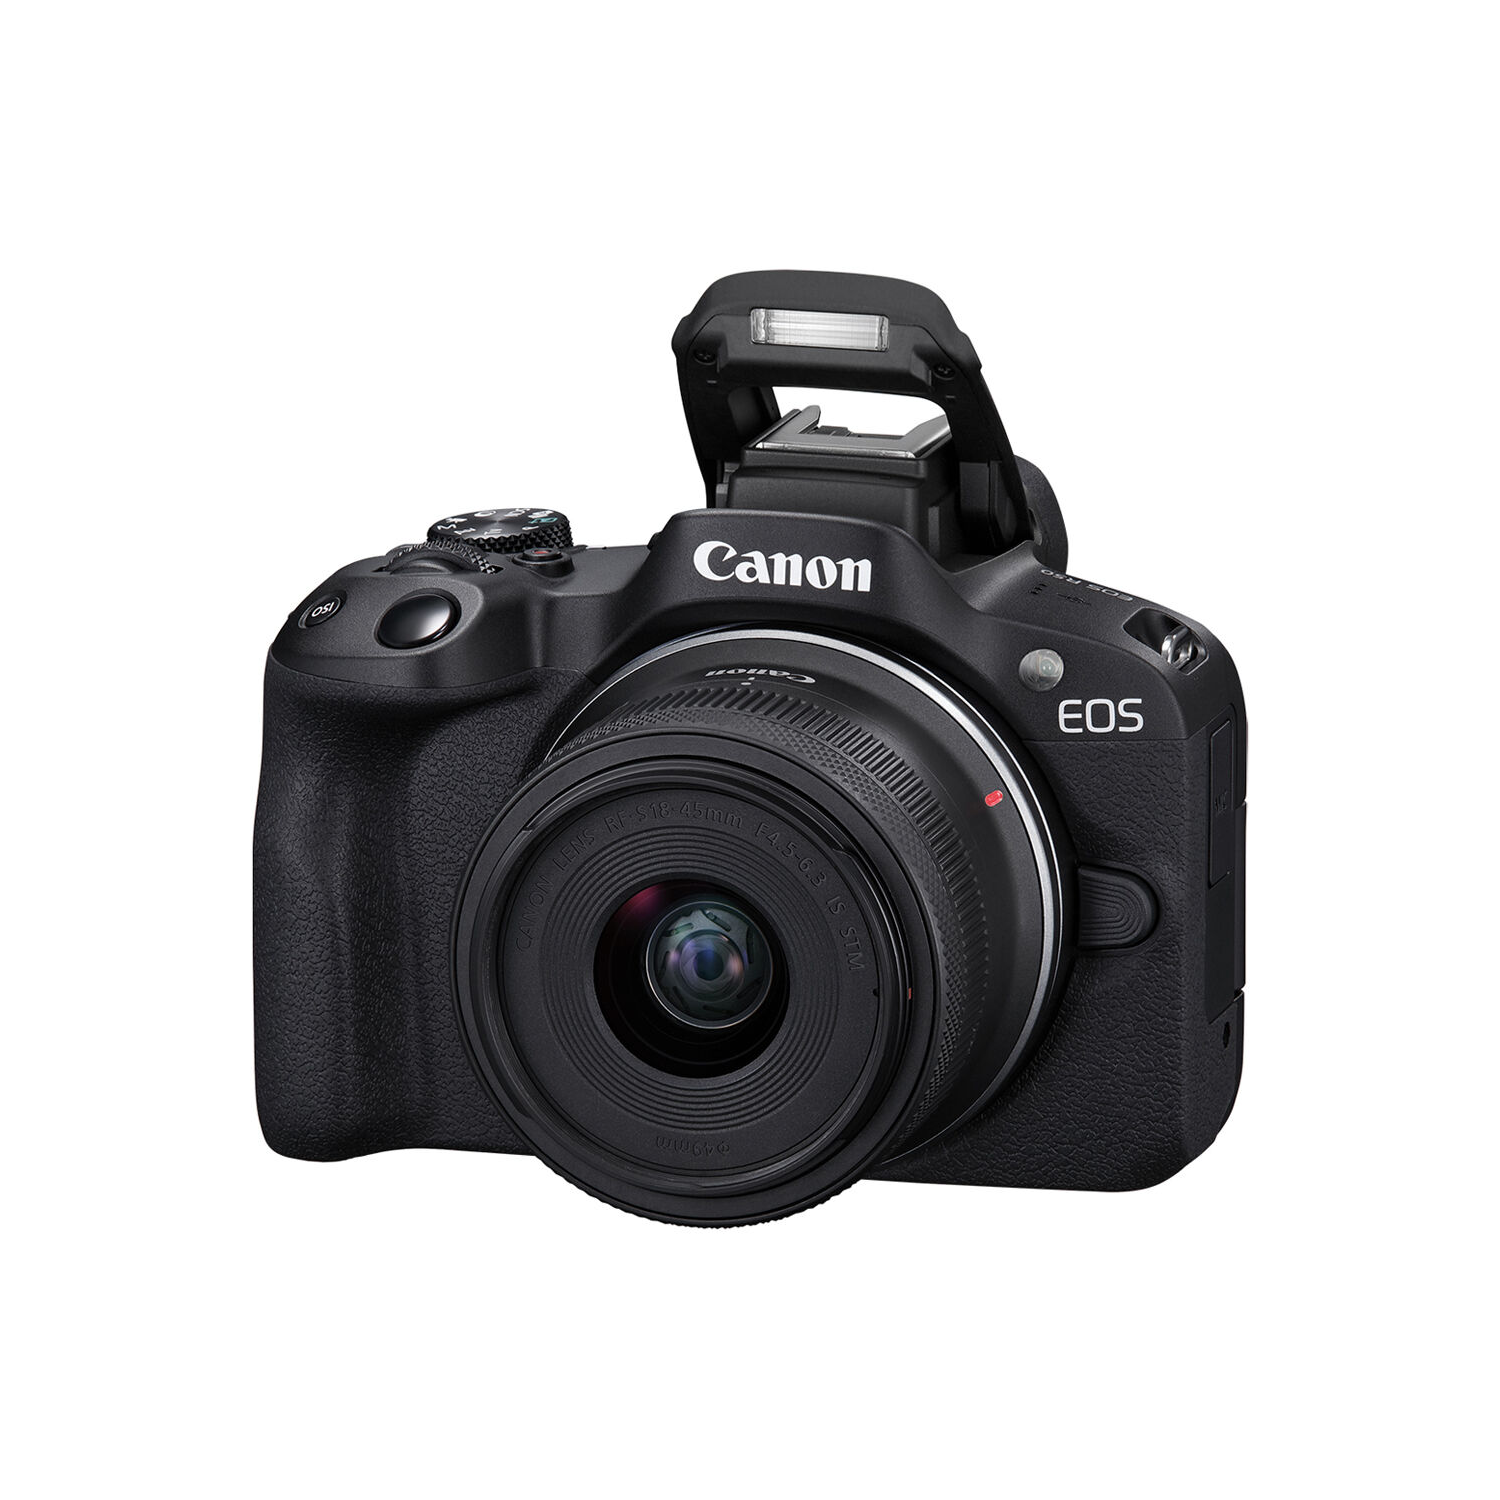 https://excellentphoto.ca/cdn/shop/products/Canon_20EOS_20R50_20Mirrorless_20Camera_20with_2018-45mm_20Lens_20_Black_20_10.png?v=1675885337&width=1500